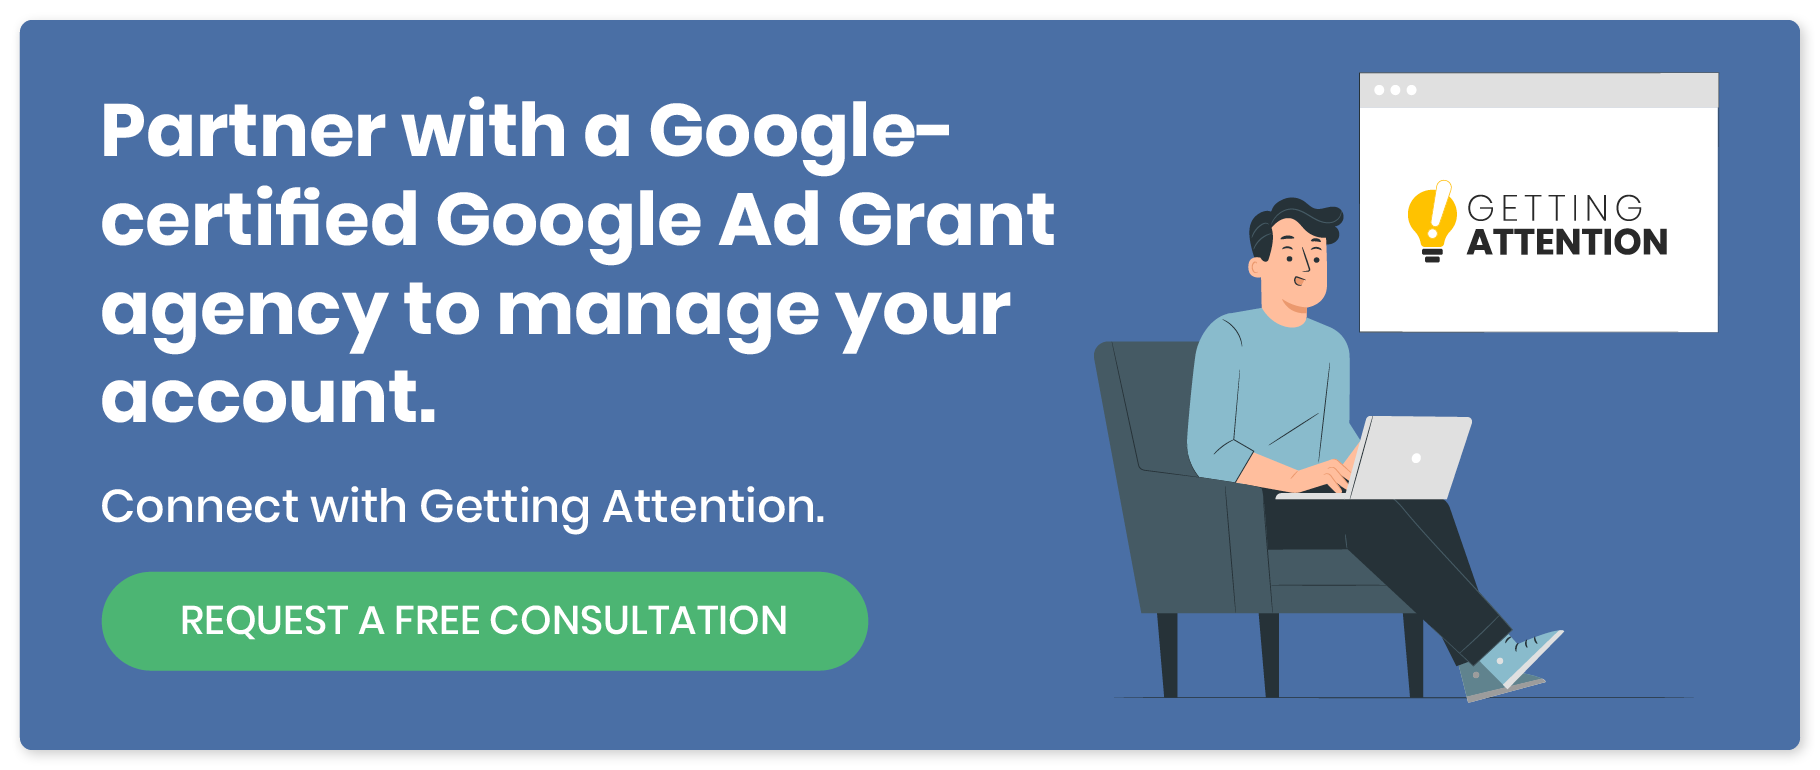 Partner with a Google-certified Google Ad Grant agency to manage your account. Connect with Getting Attention. Request a free consultation. 